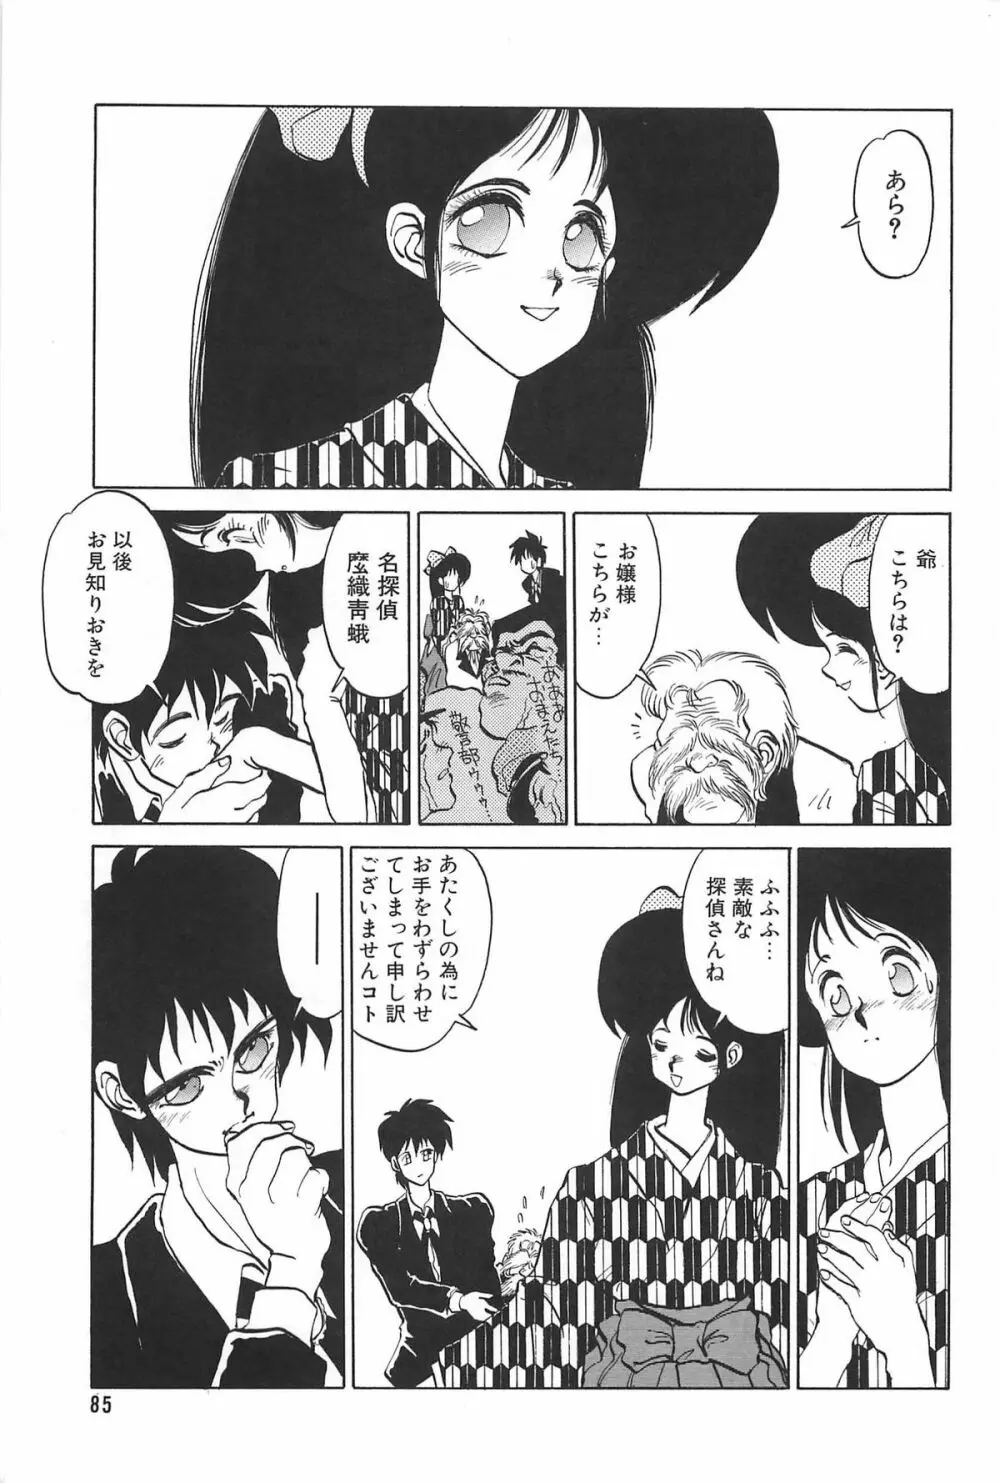 LOVE ME 1995 Page.87